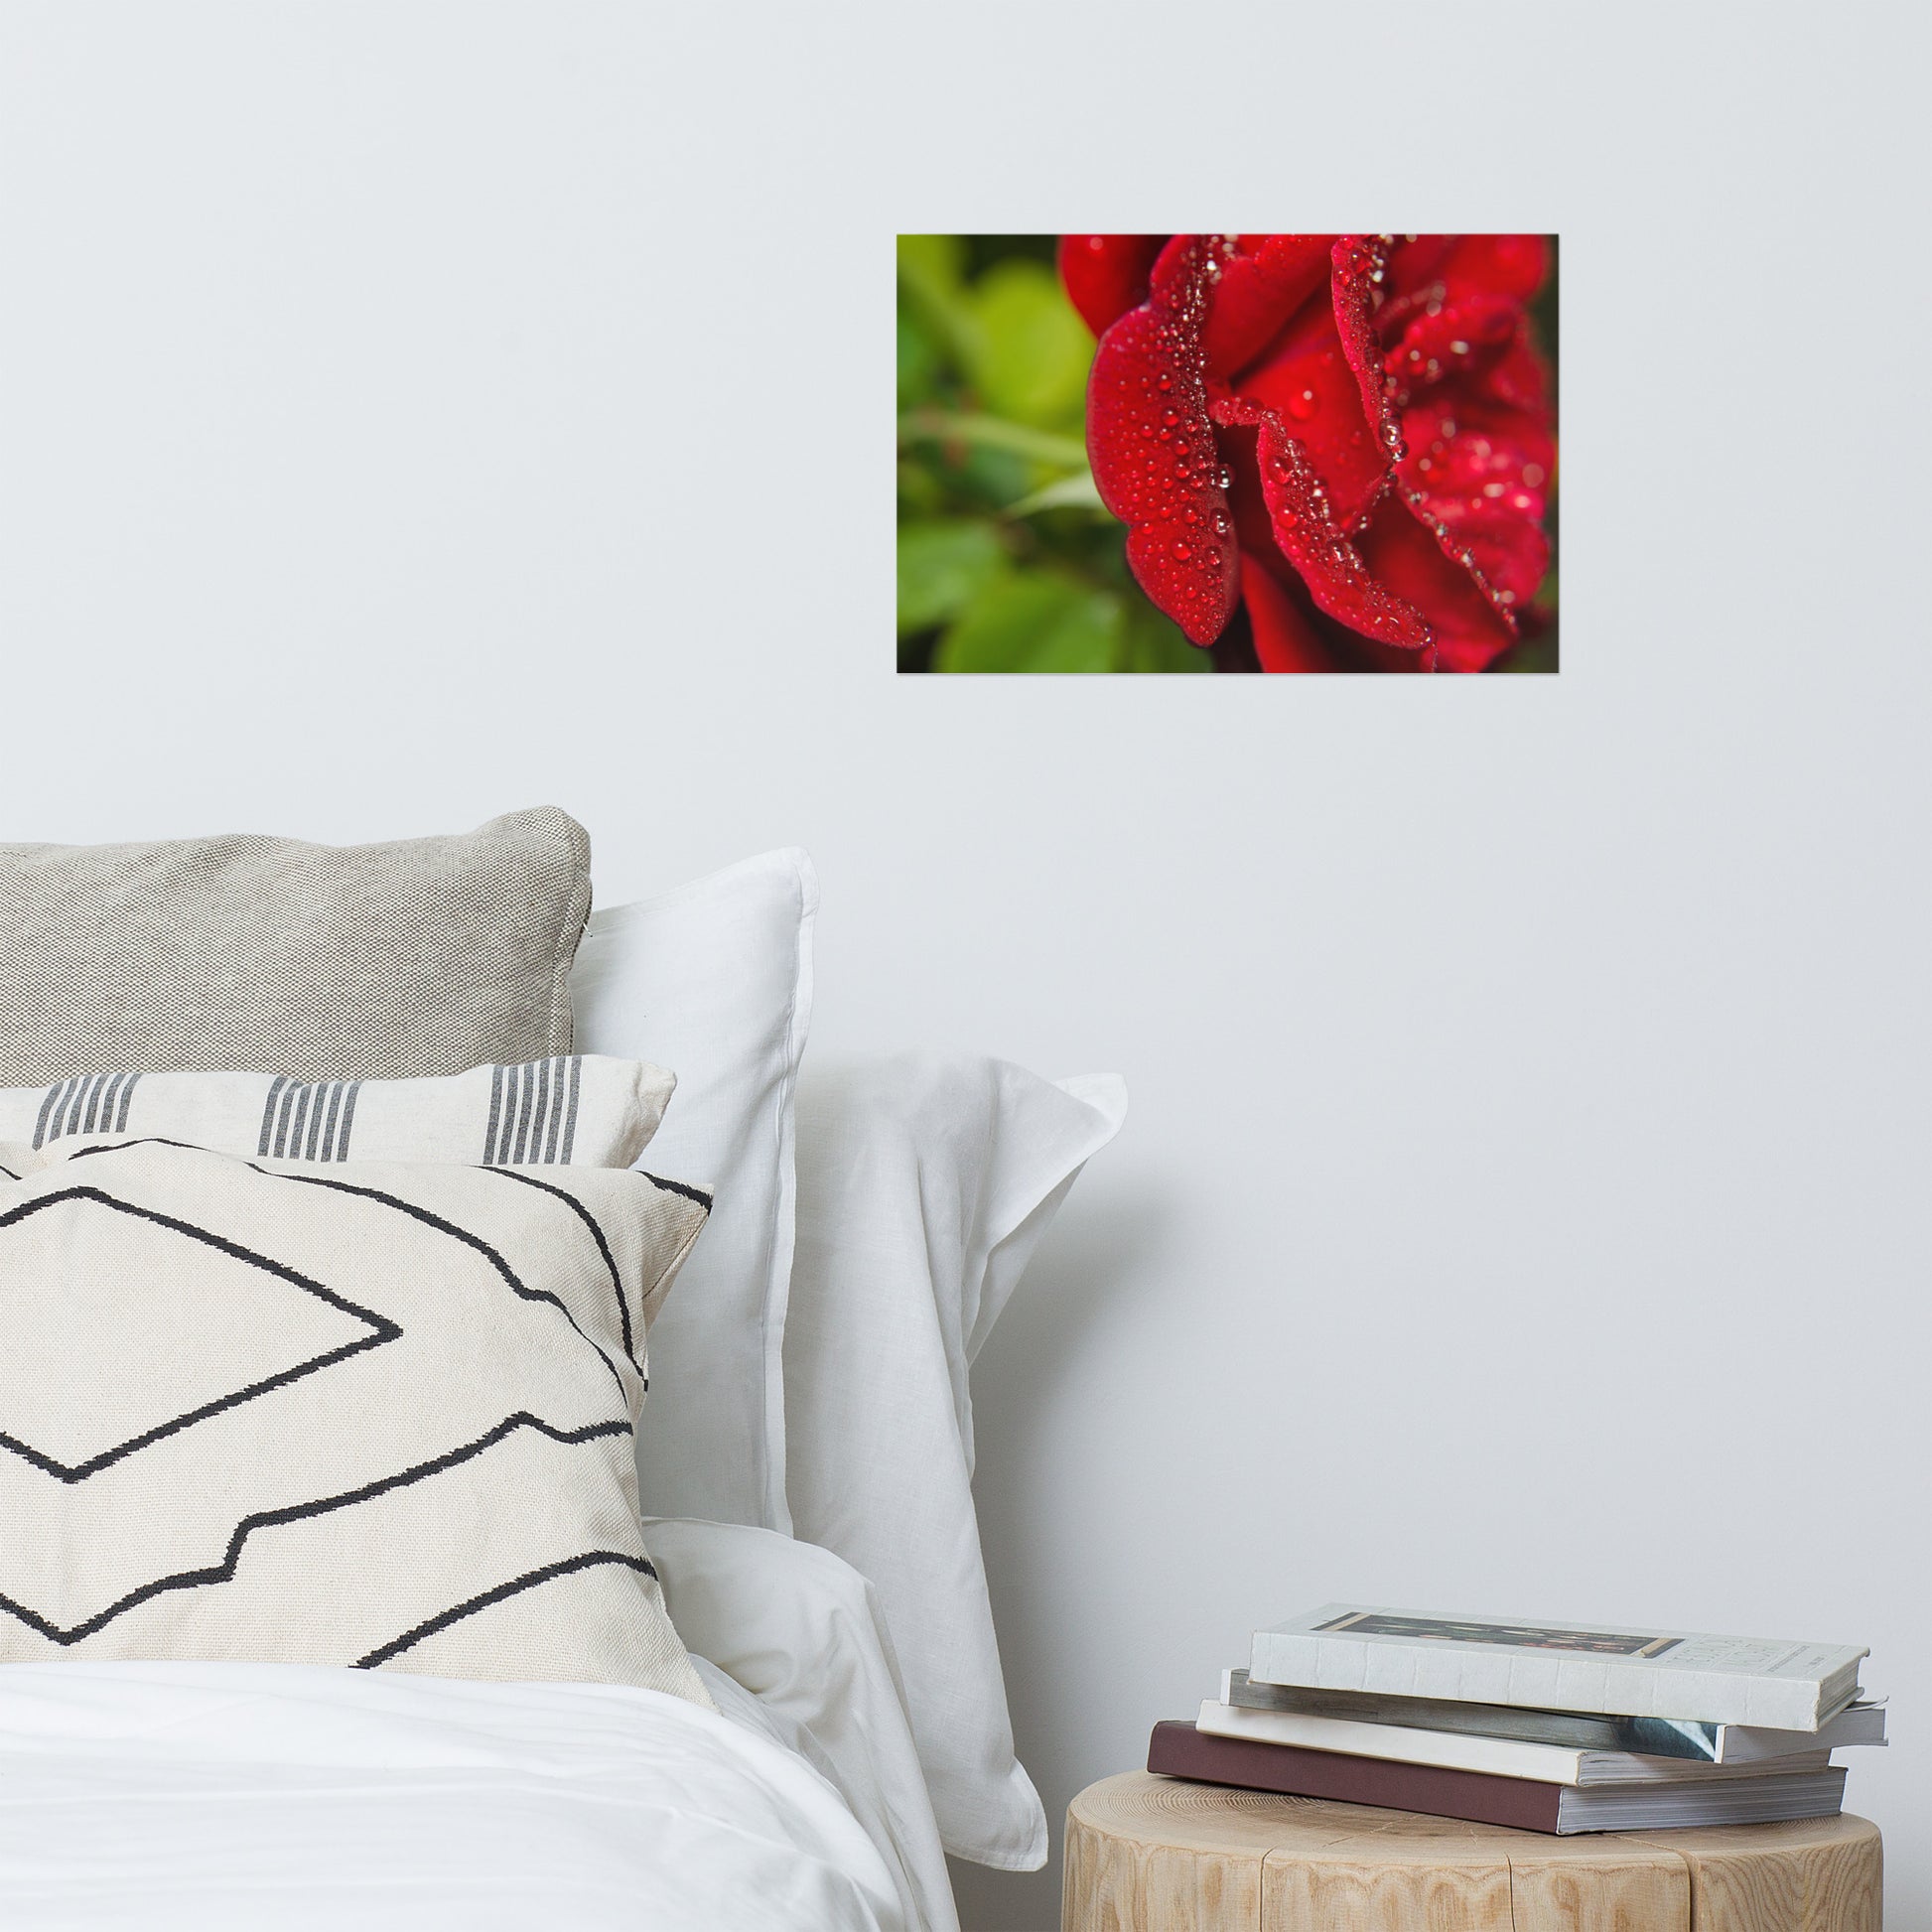 rose pictures for wall: Bold and Beautiful - Floral / Flora / Flowers / Nature Photograph - Loose / Frameable / Unframed / Frameless Wall Art - Artwork